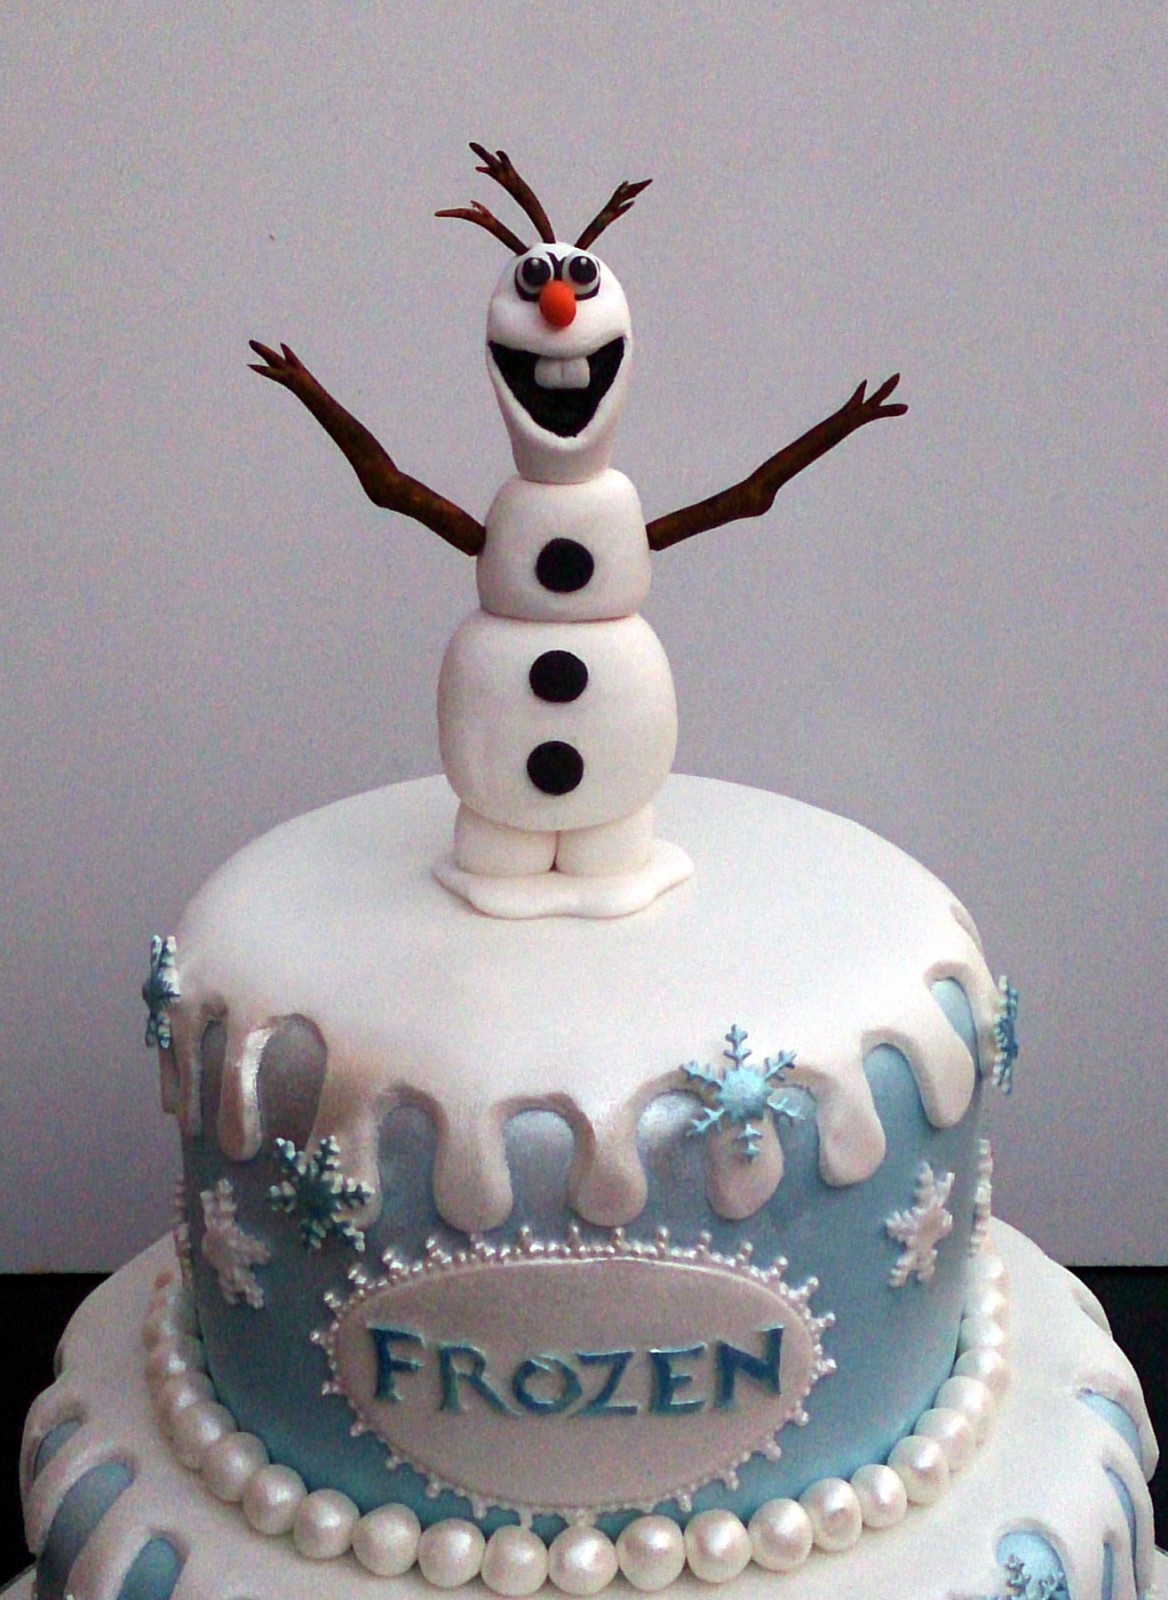 Disney Frozen Birthday Cakes
 Disney Frozen Themed Cake With Olaf Anna and Elsa Susie